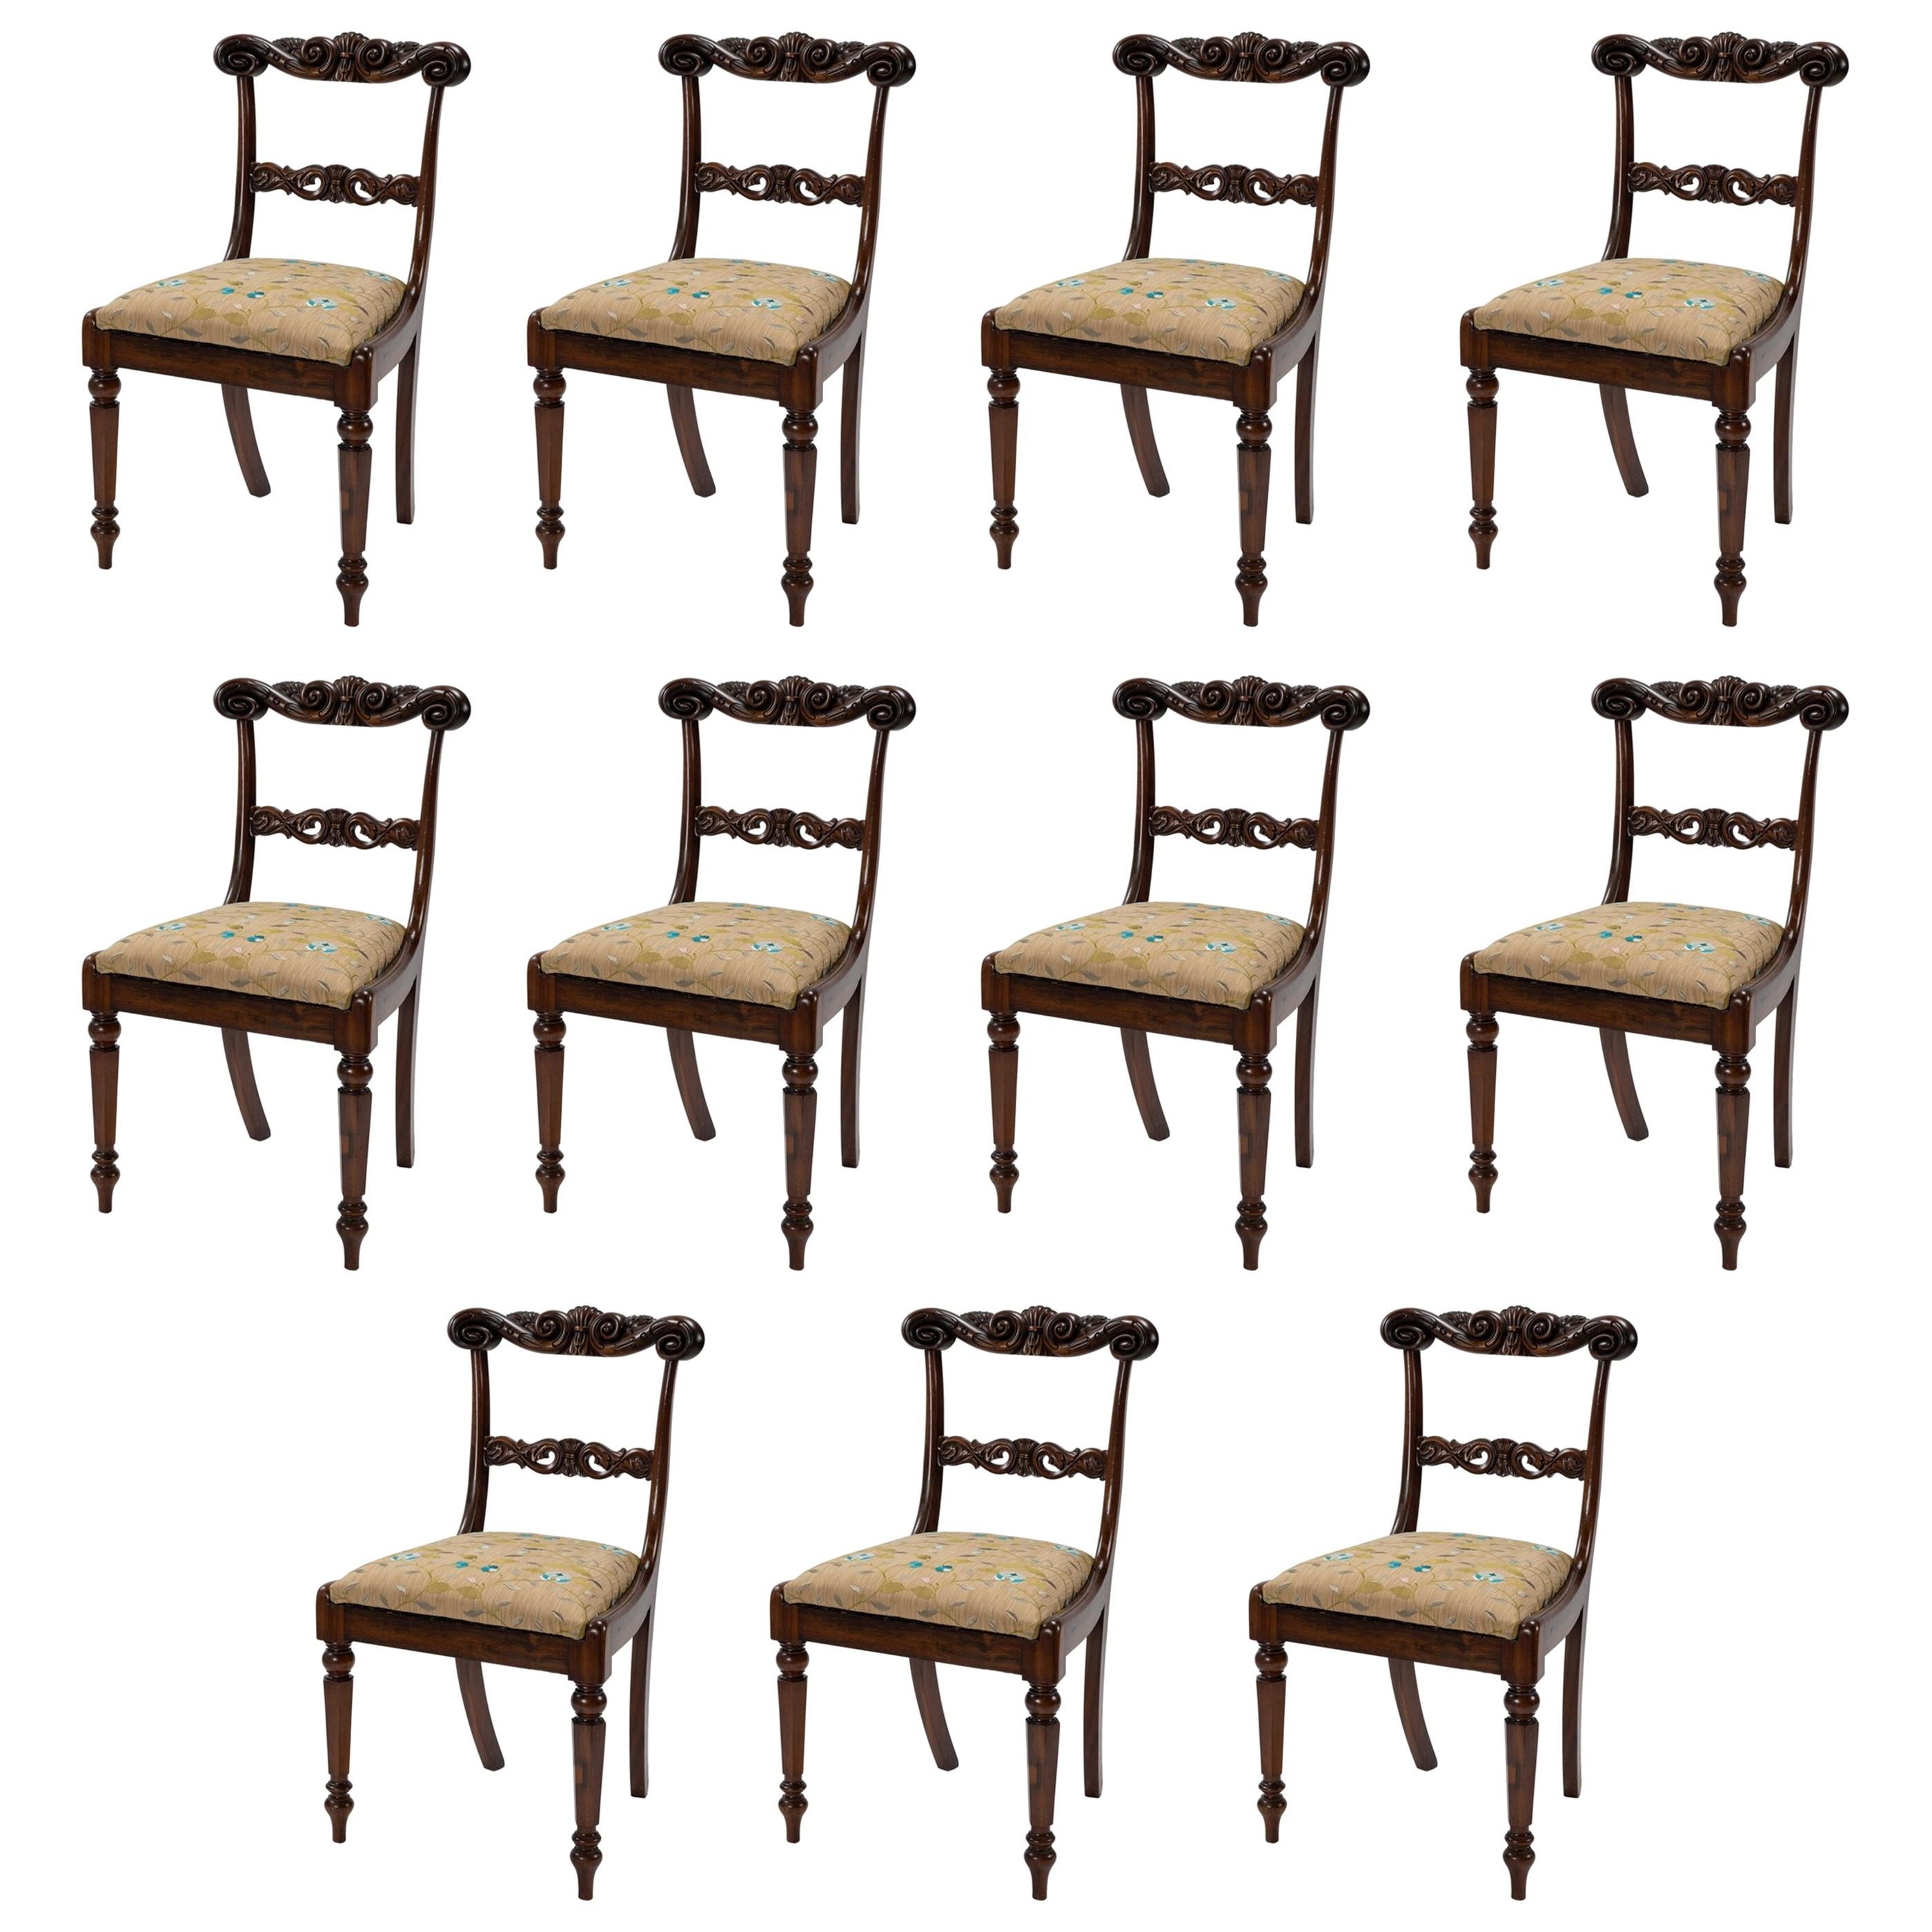 Matched Set on Eight and Three, Eleven in Total, George IV Dining Chairs